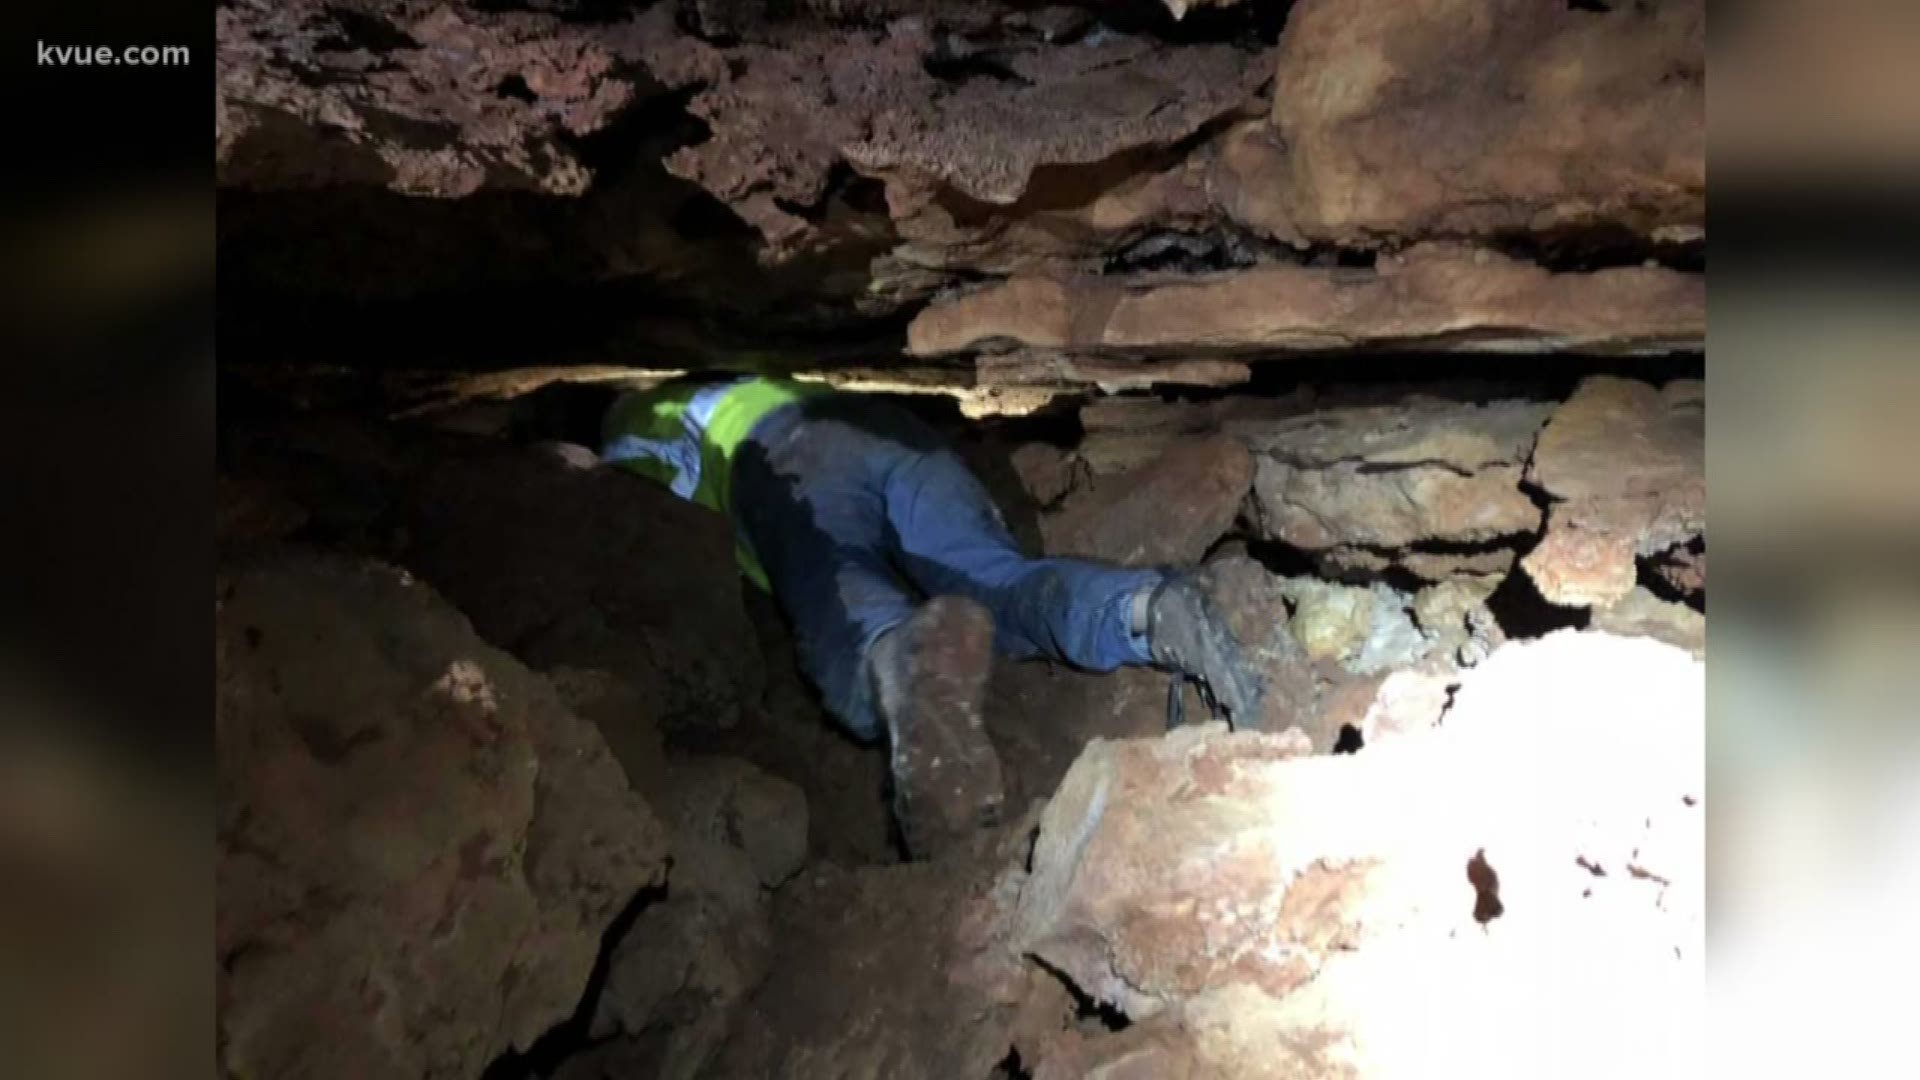 A cave underneath a neighborhood in Williamson County is even bigger than authorities first thought after engineers found a fourth chamber.